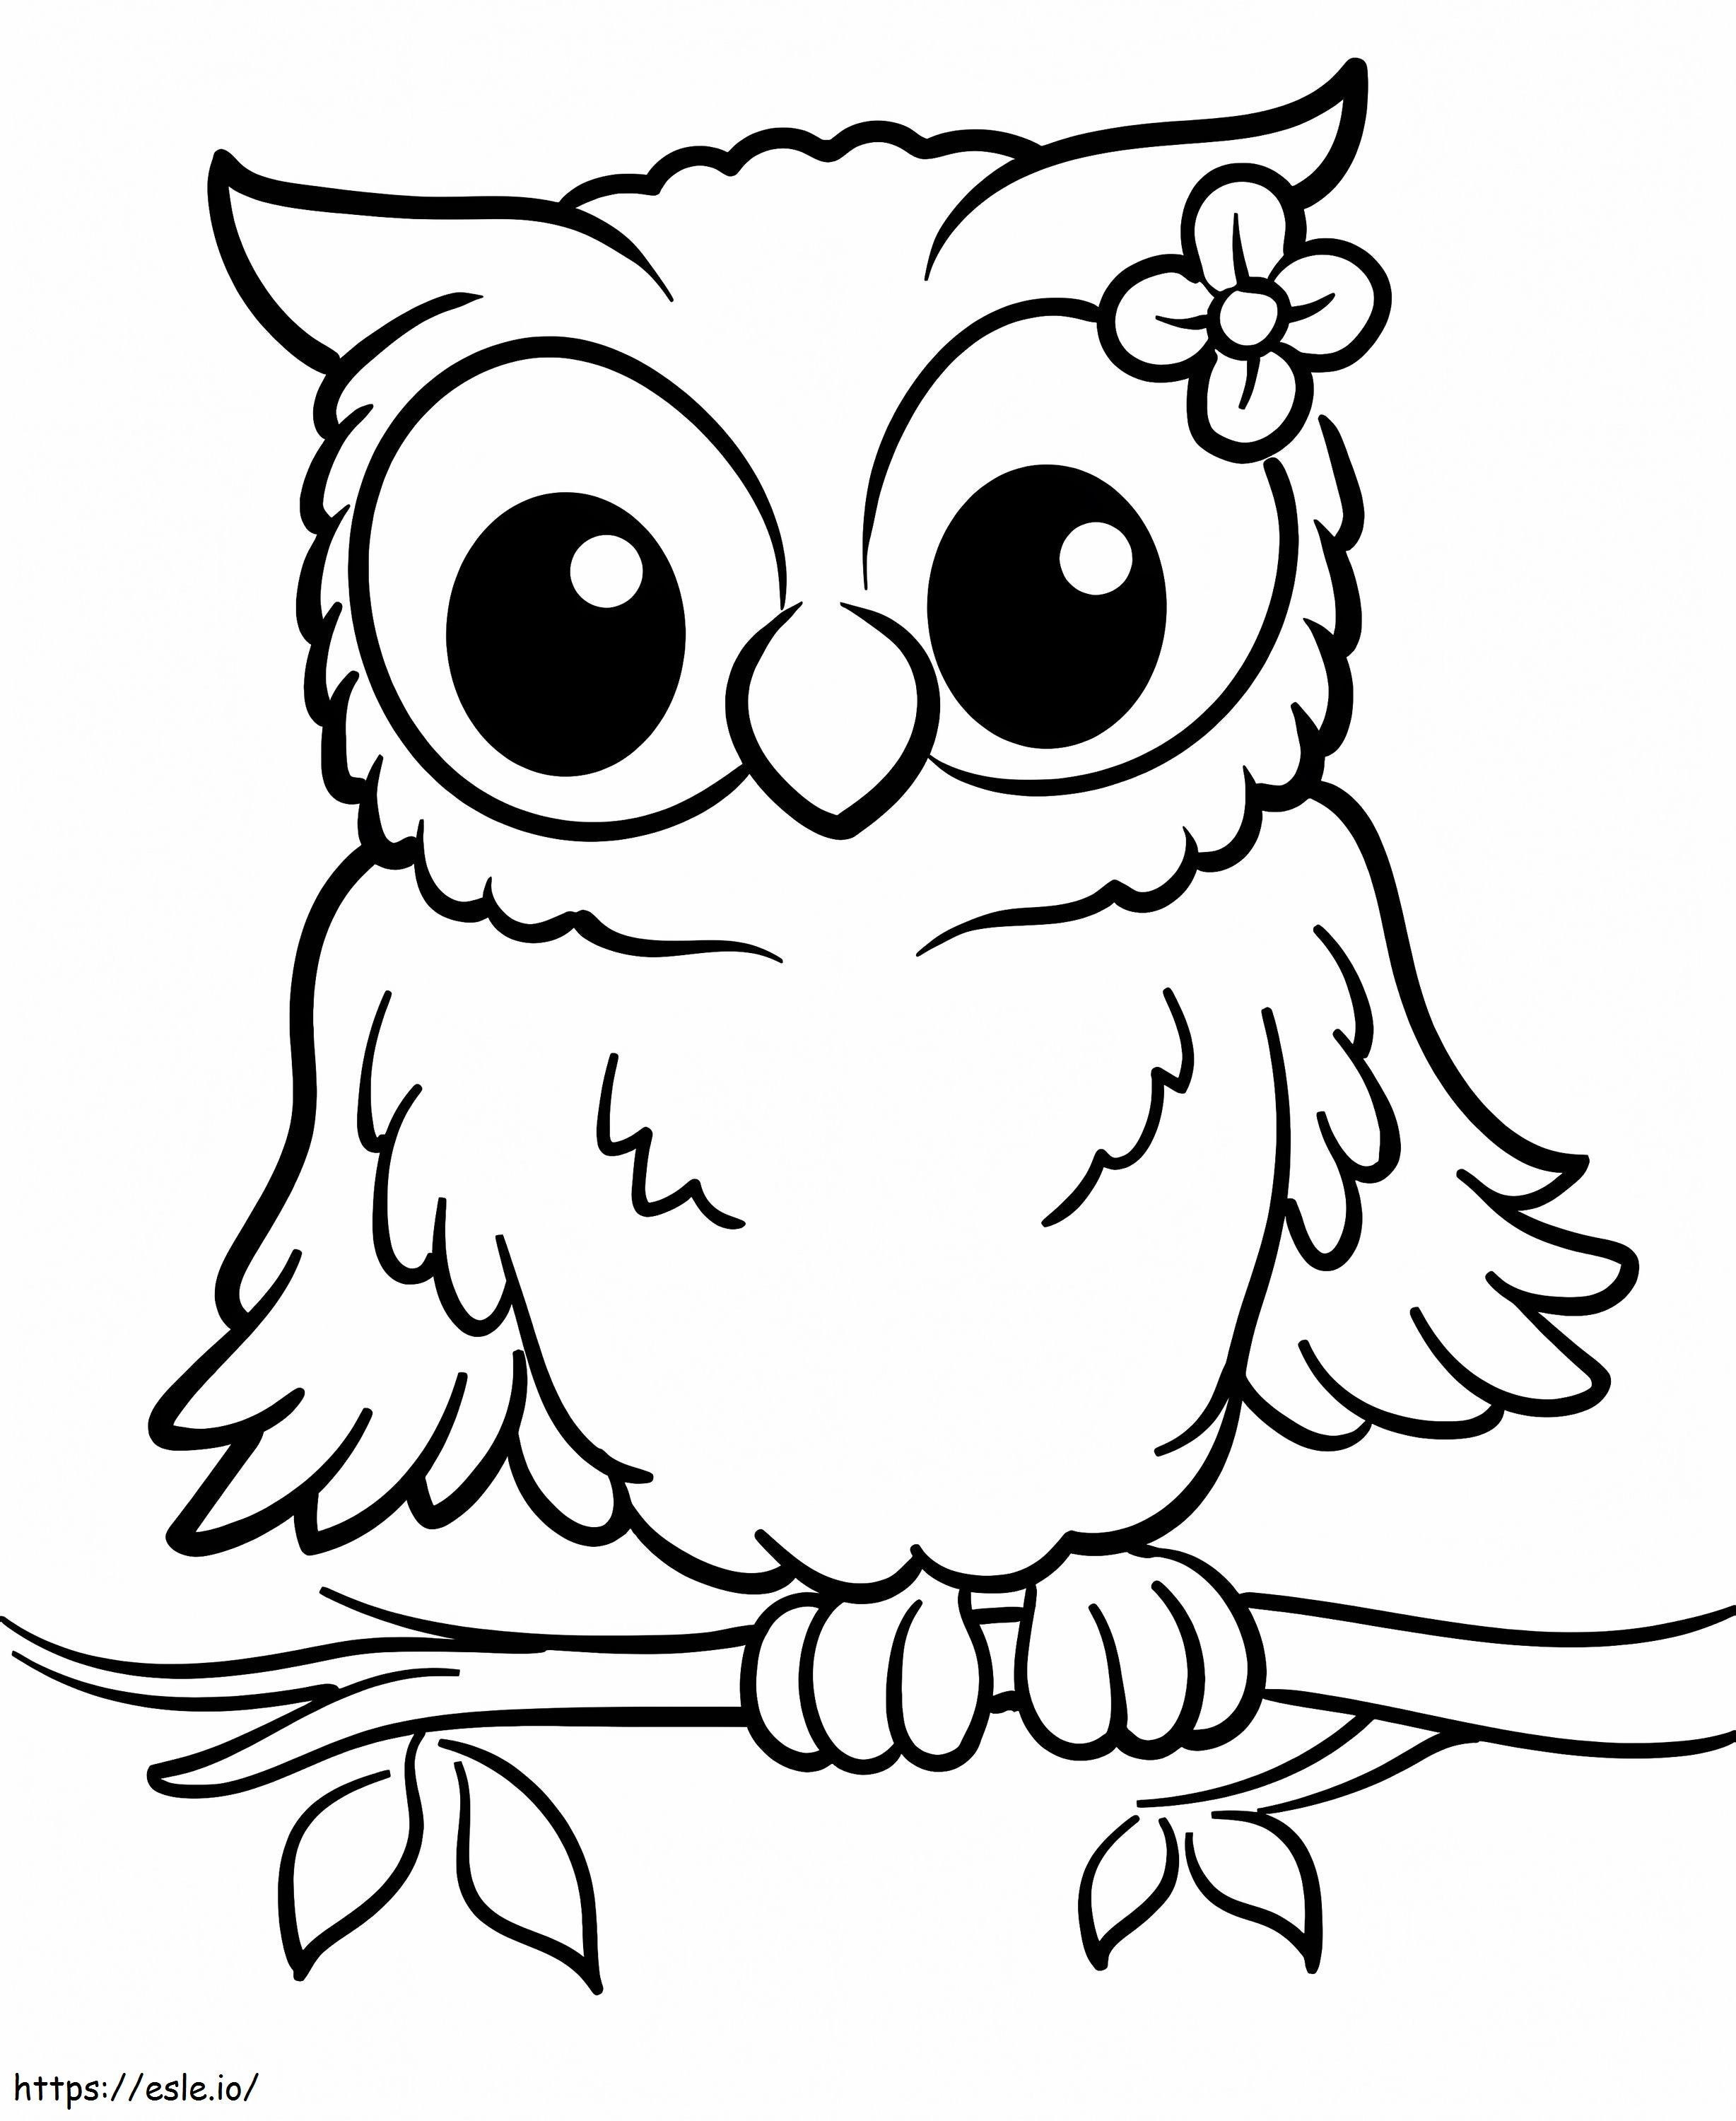 Lovely Owl coloring page